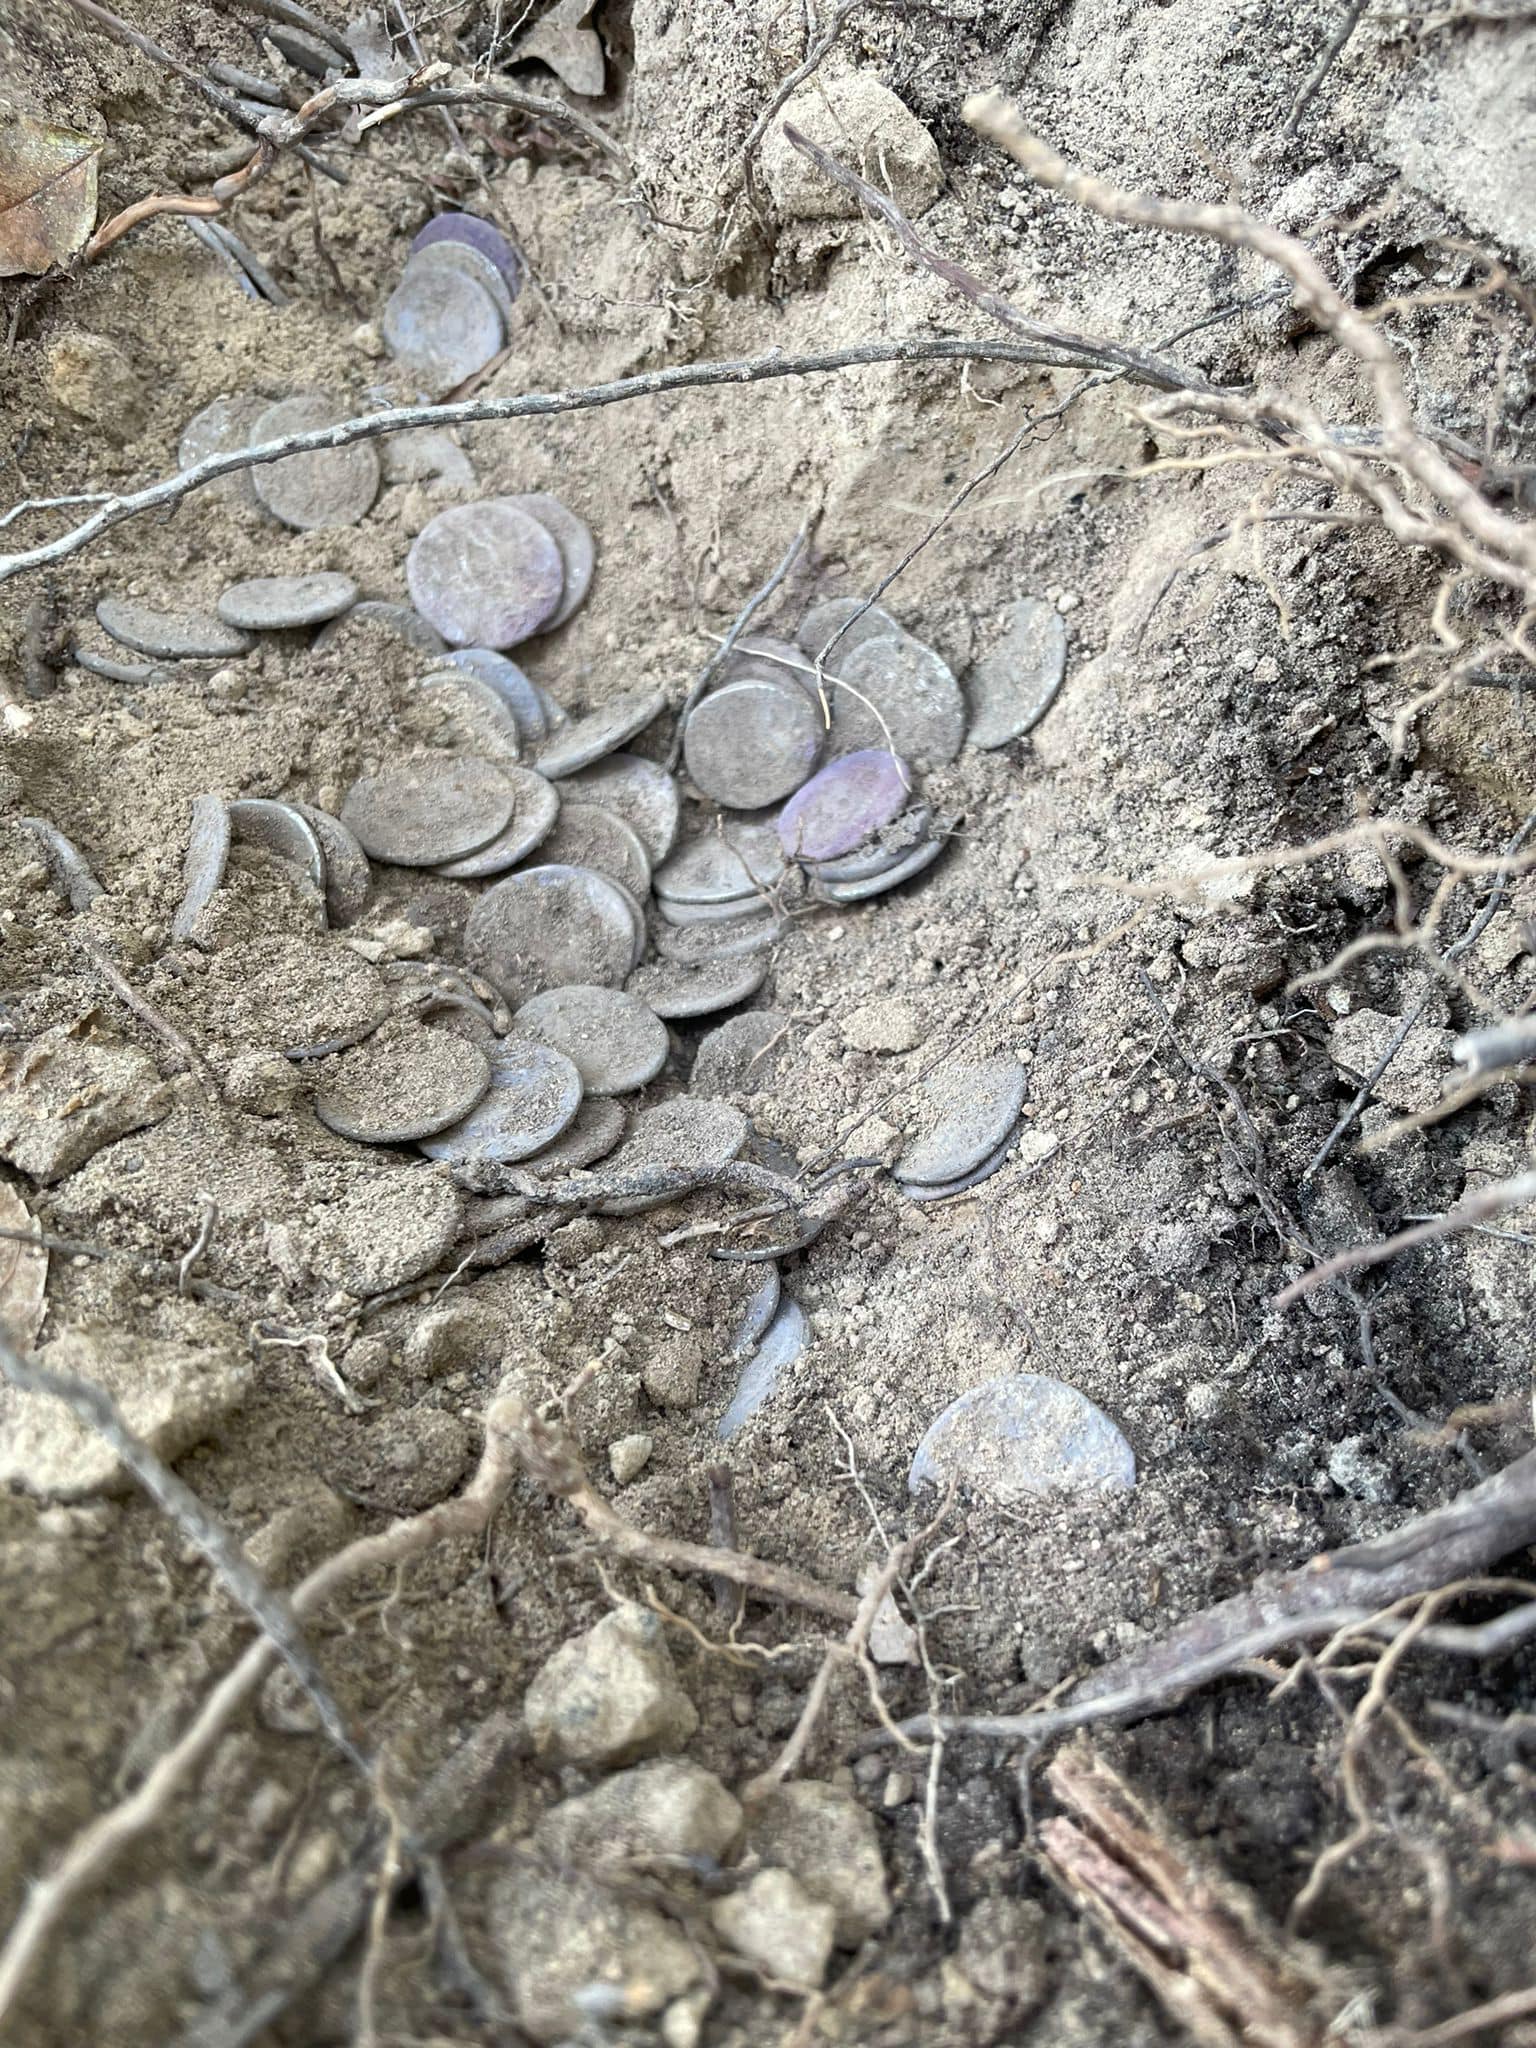 He found over 2,000-year-old Roman coins worth hundreds of thousands; he gave up the reward